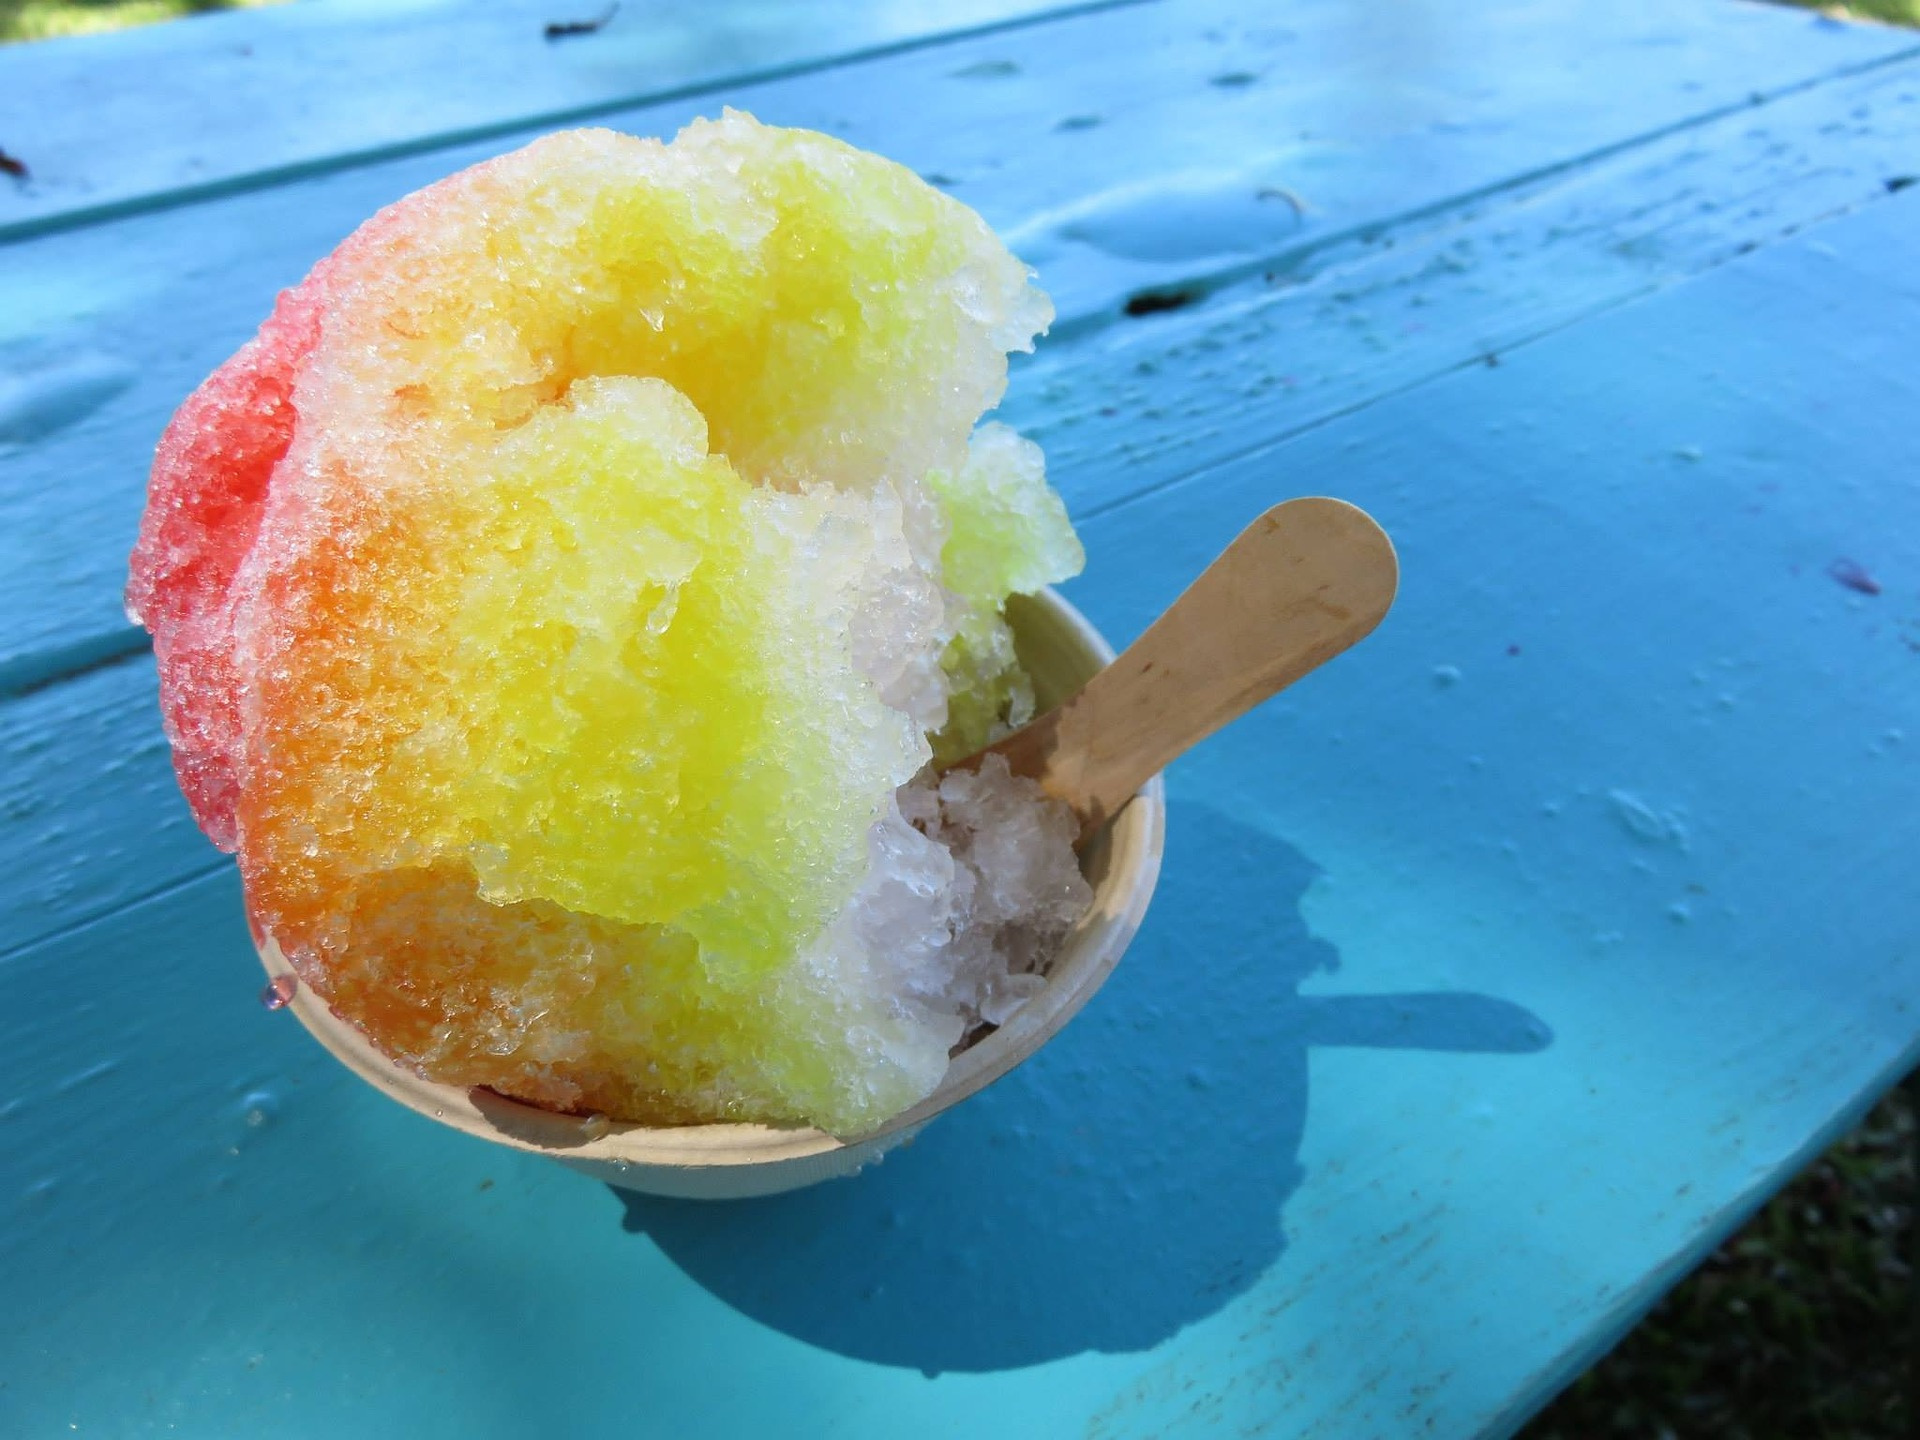 Established Authentic (mobile) Hawaiian Shave Ice Business